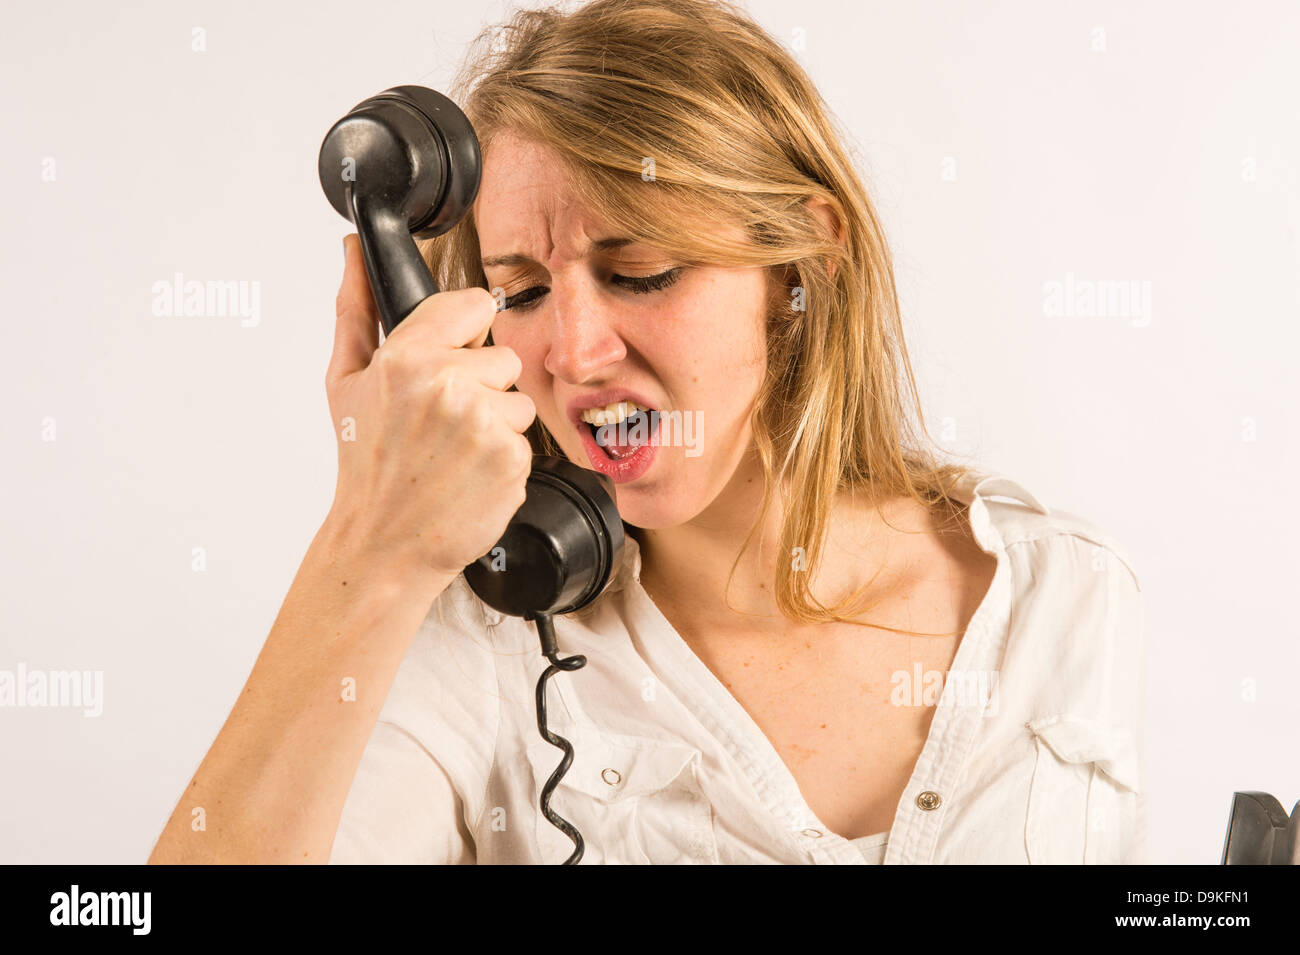 Poor customer service: An angry young woman shouting yelling into an old retro telephone receiver Stock Photo